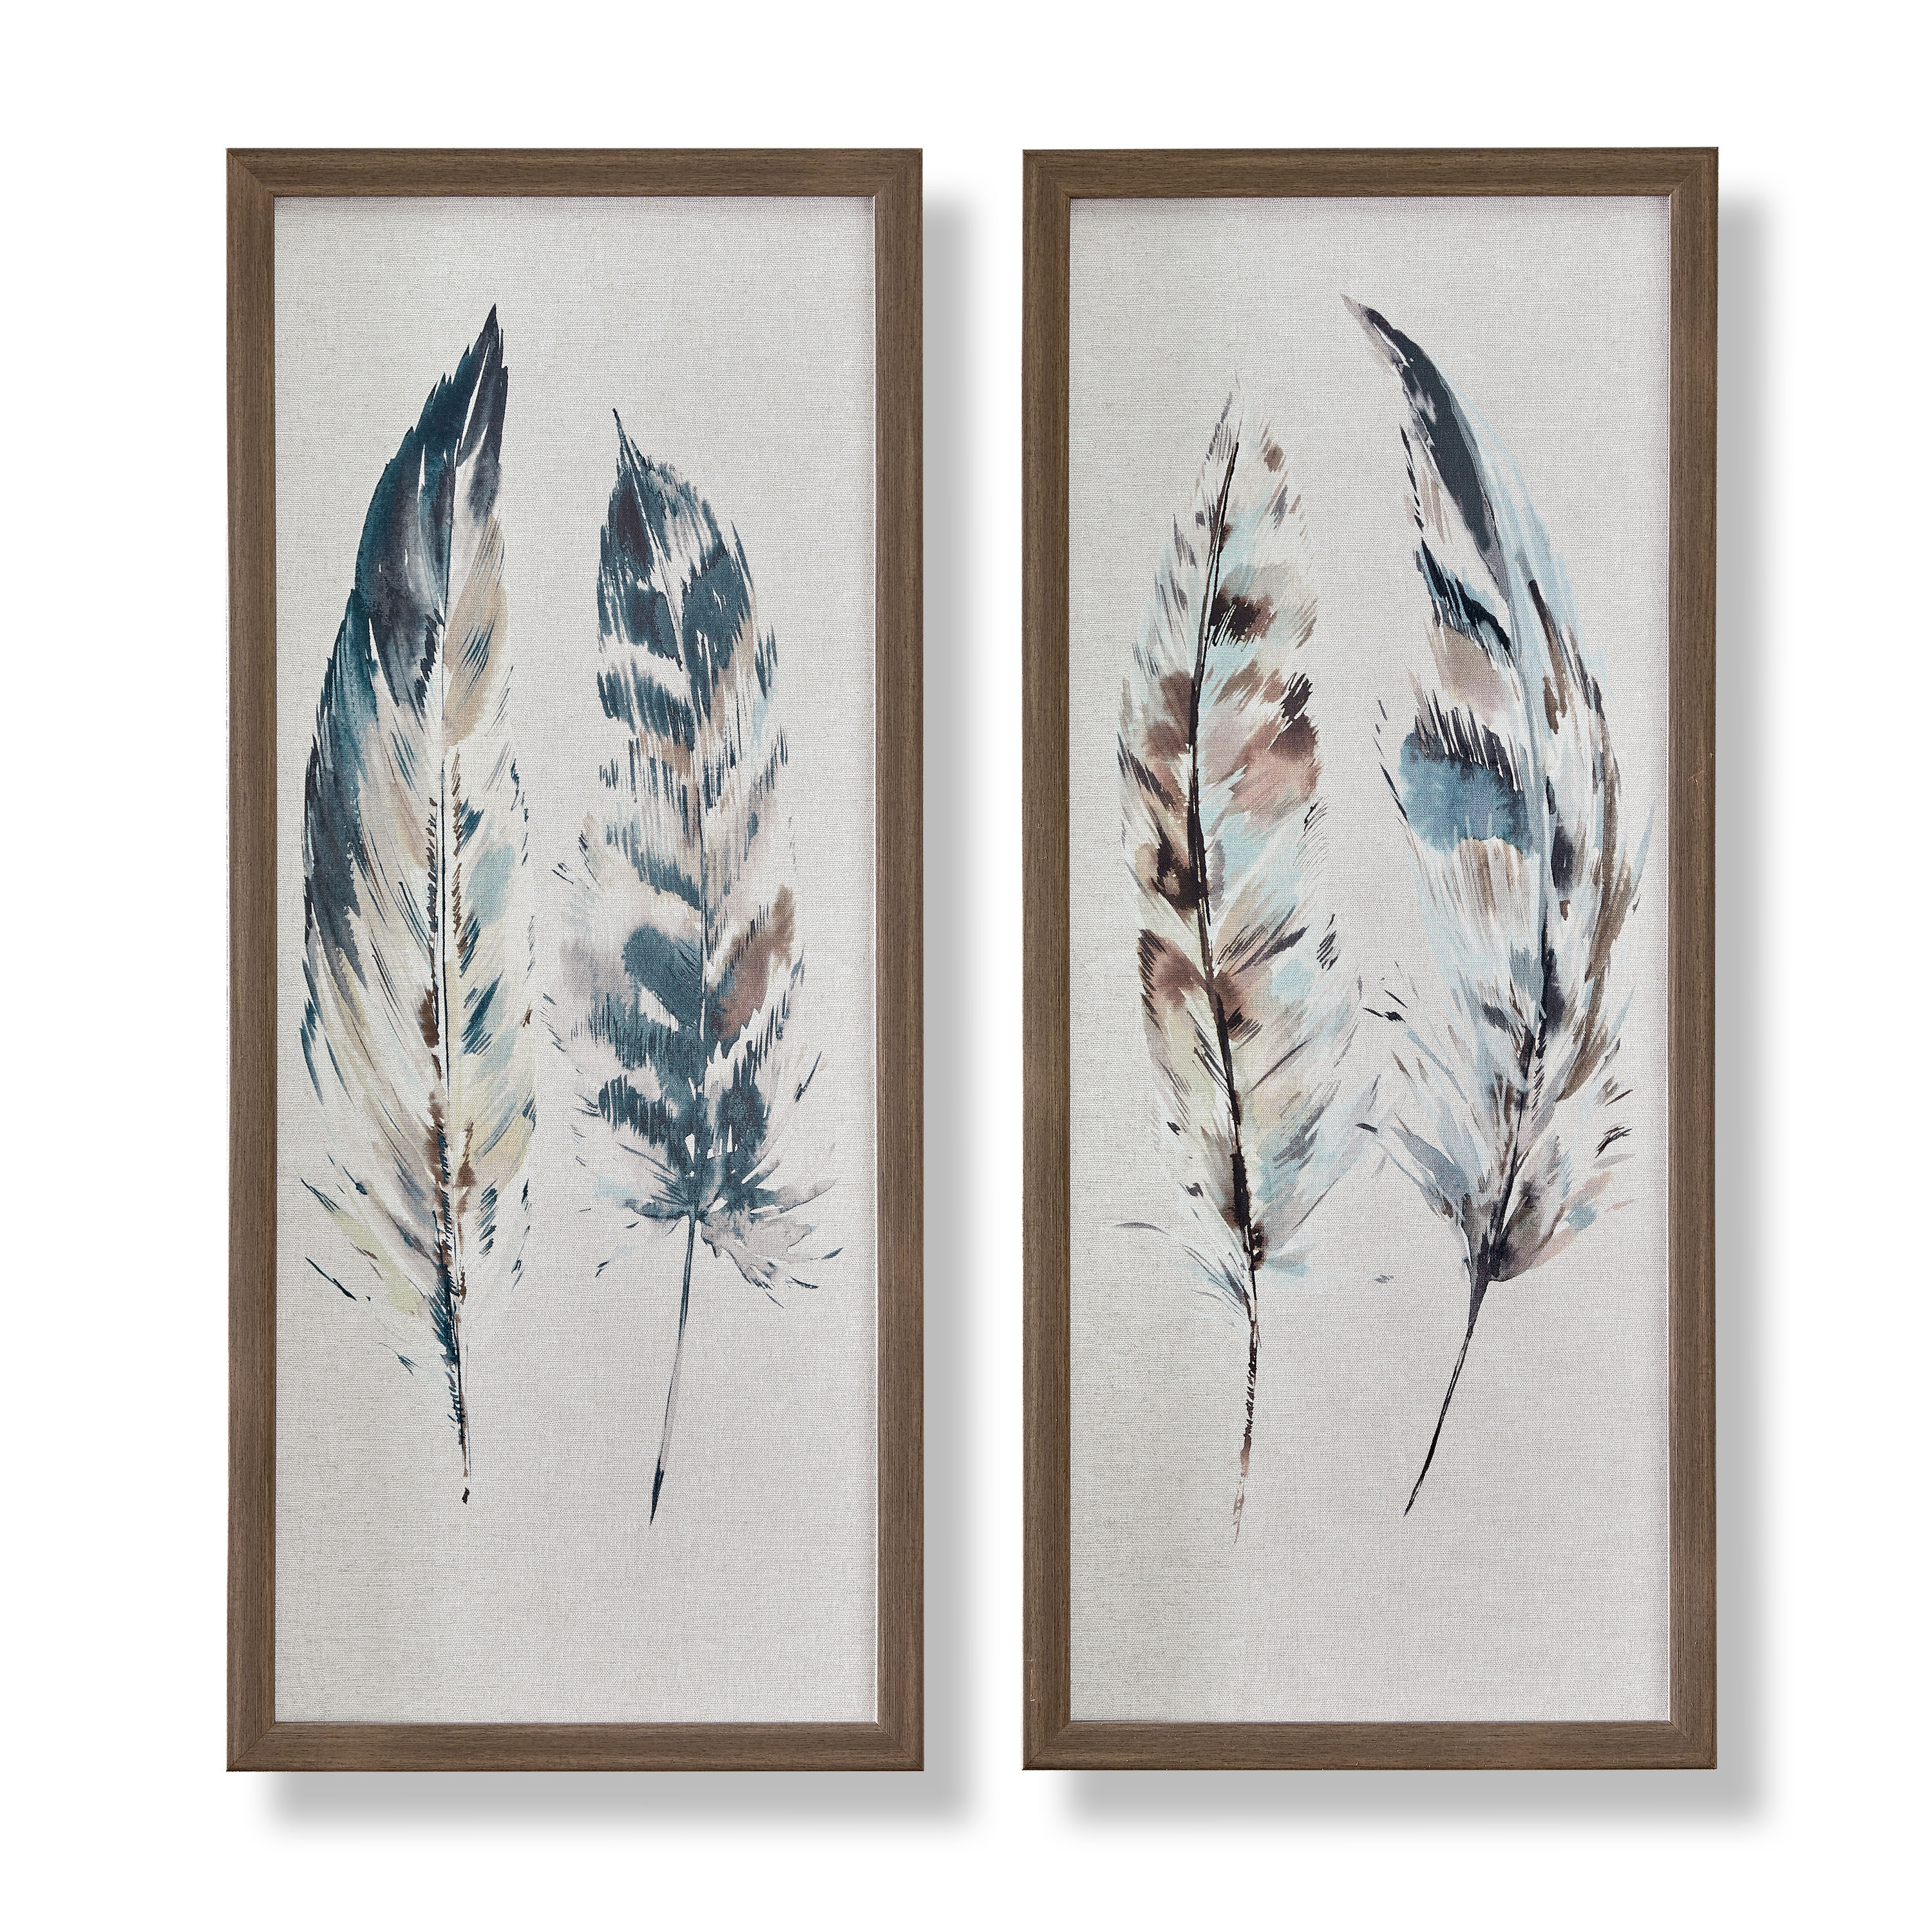 Falling Feather Art - Gold Feathers in Shadow Box - Gold Frame - Wood